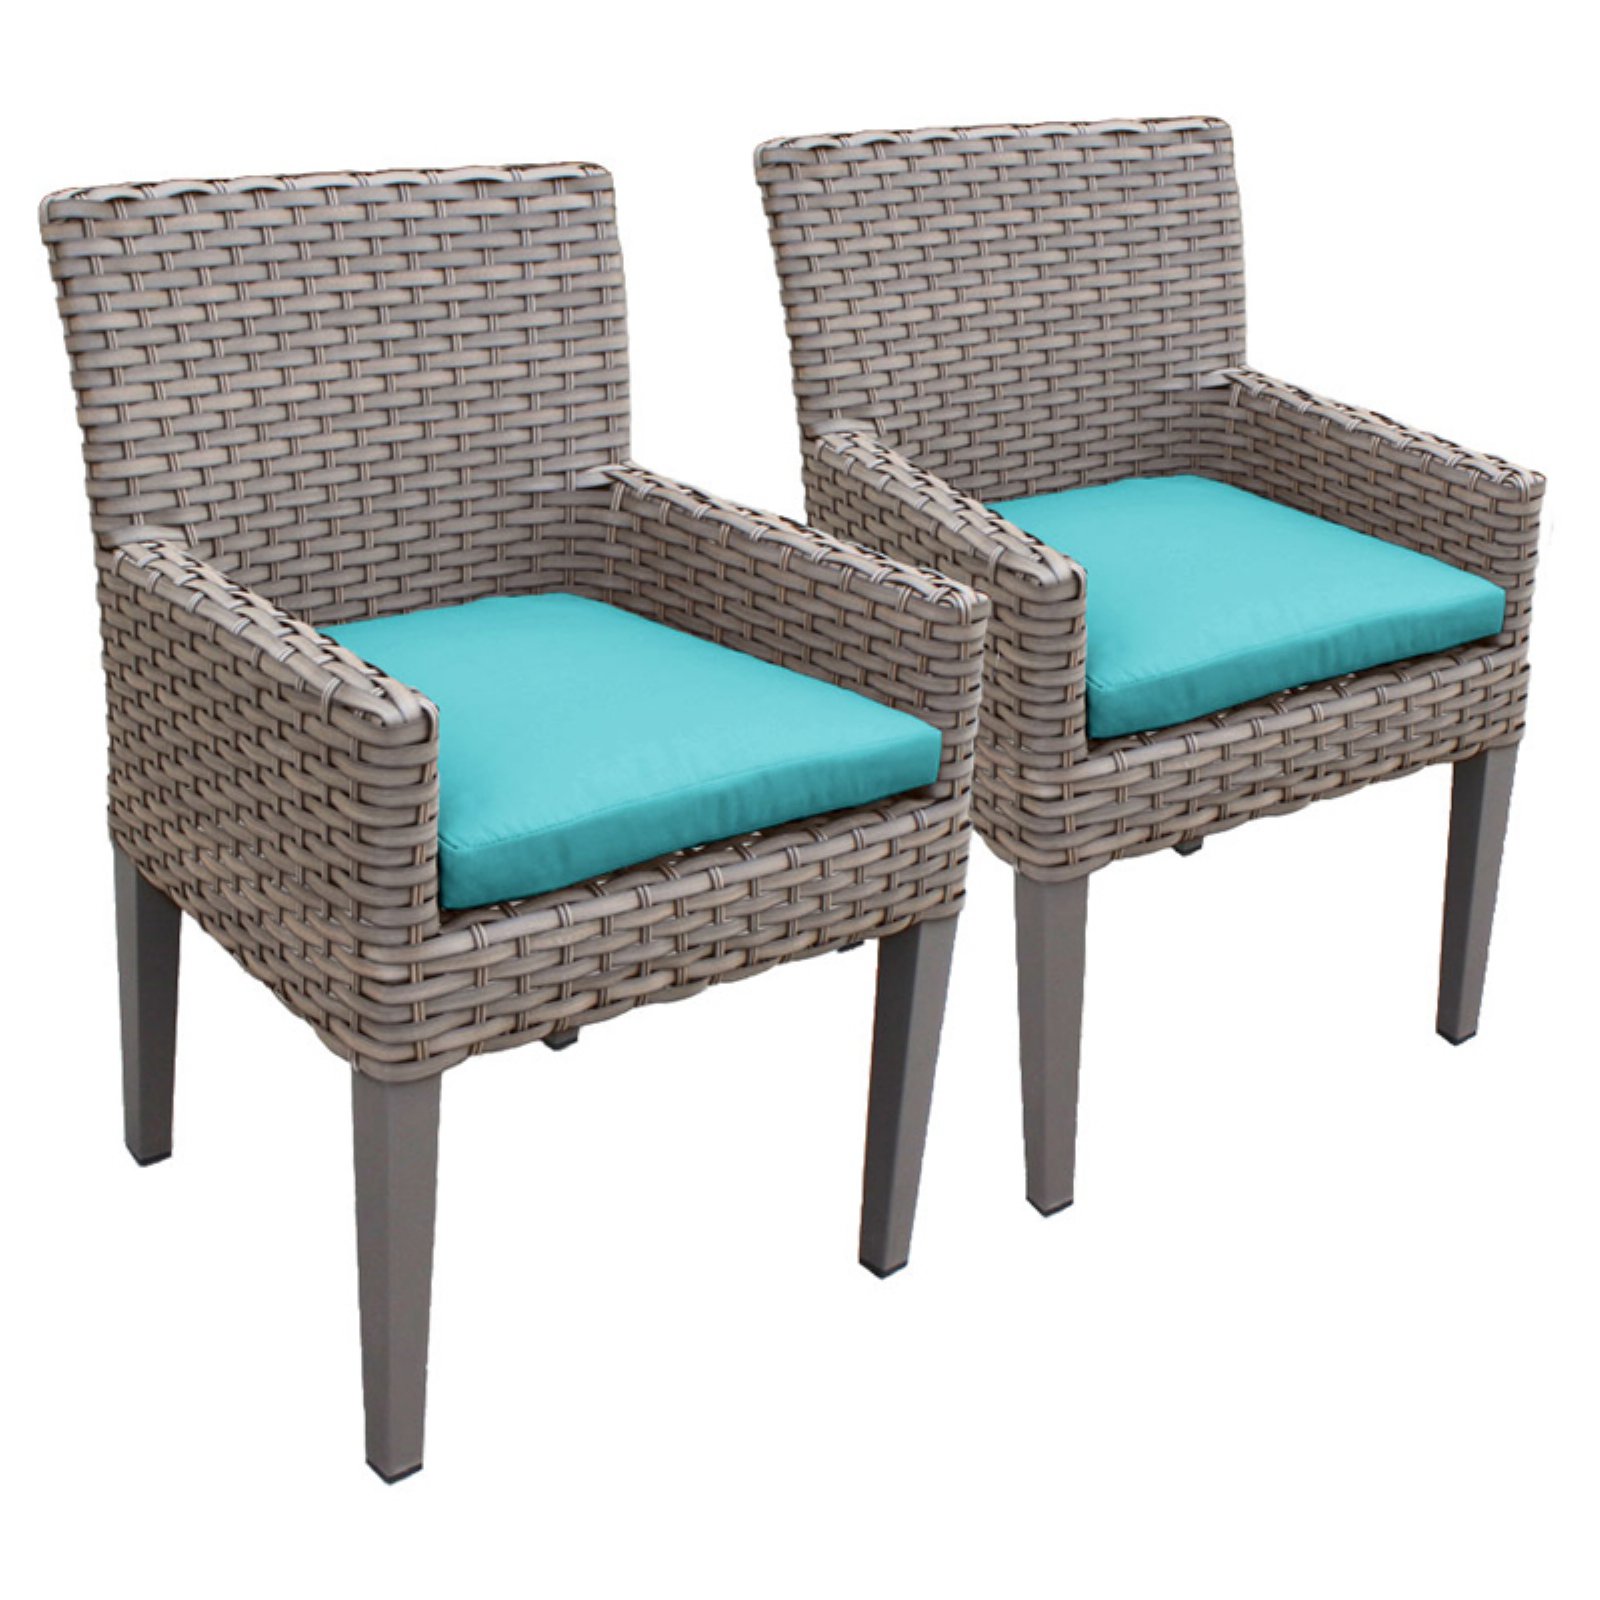 2 Oasis Dining Chairs With Arms in Aruba - image 1 of 2